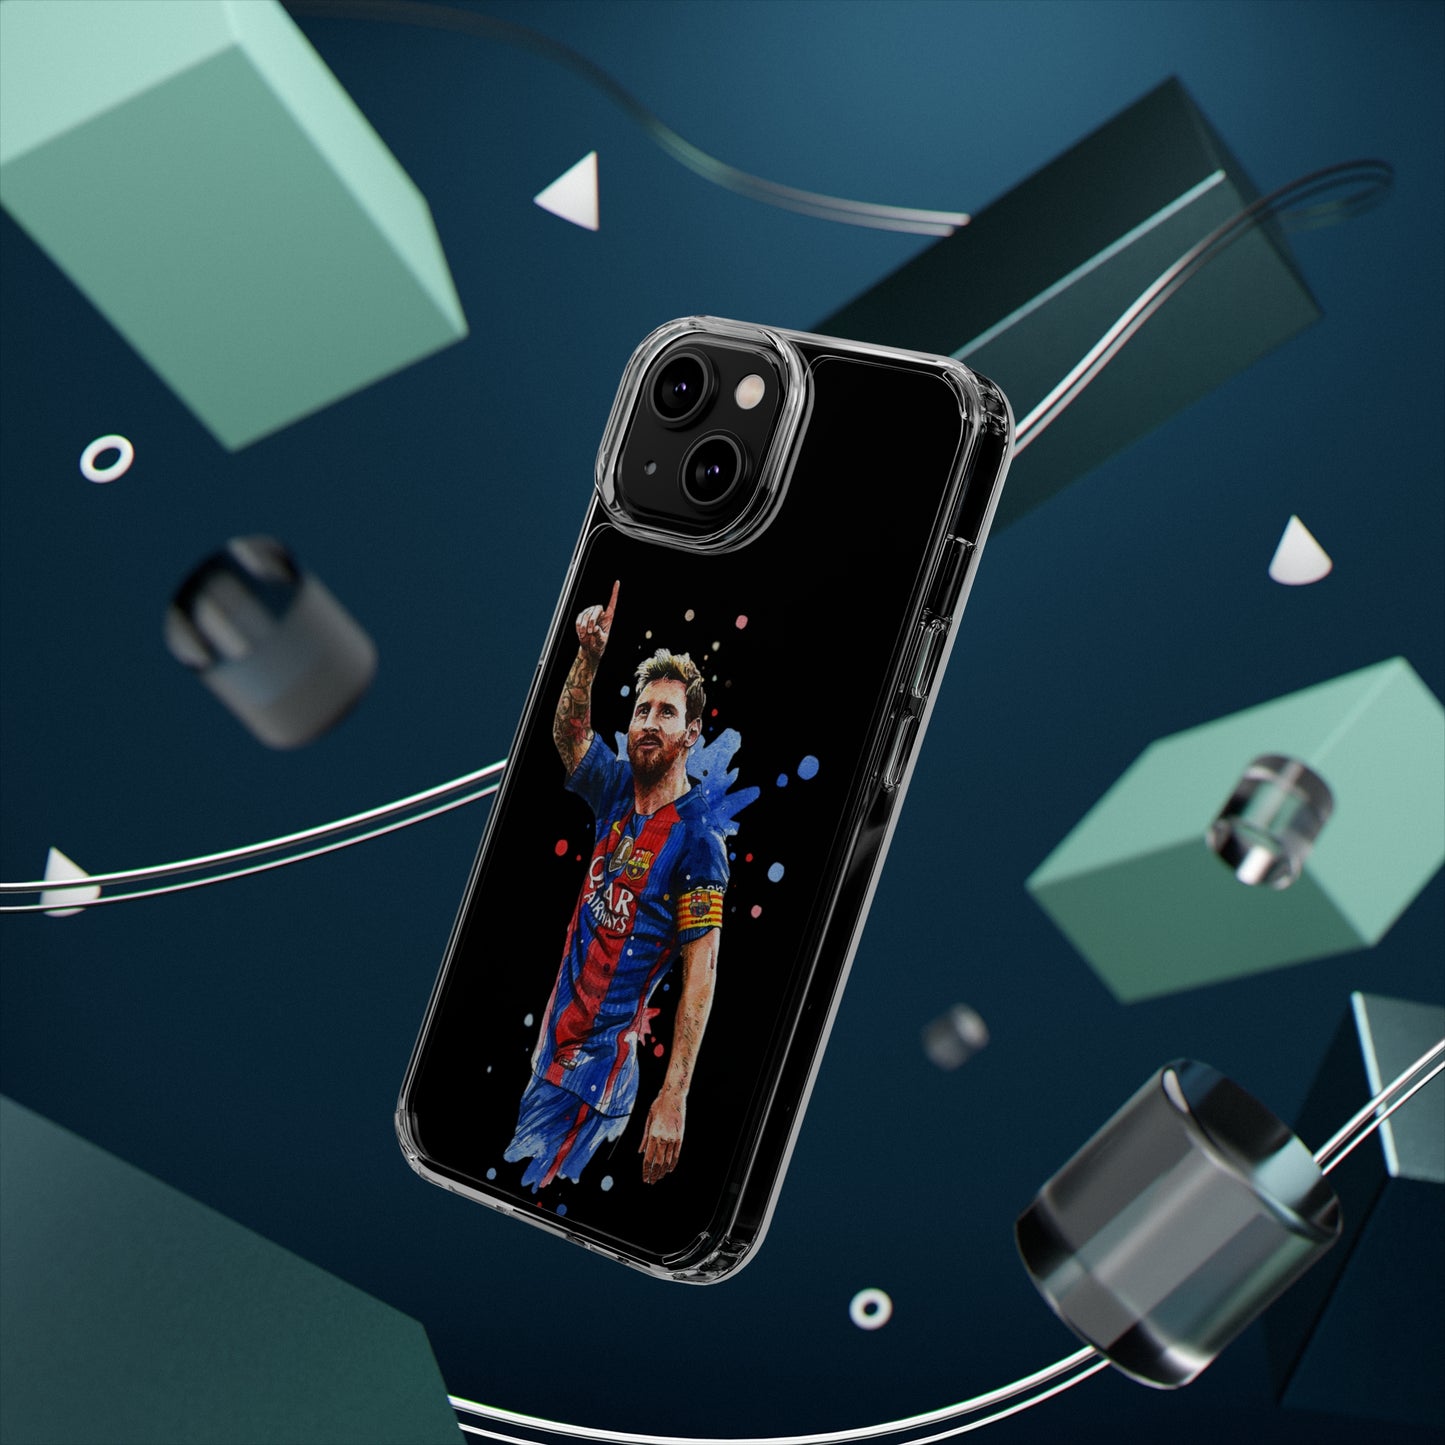 Blonde Messi Barcelona Clear Cases